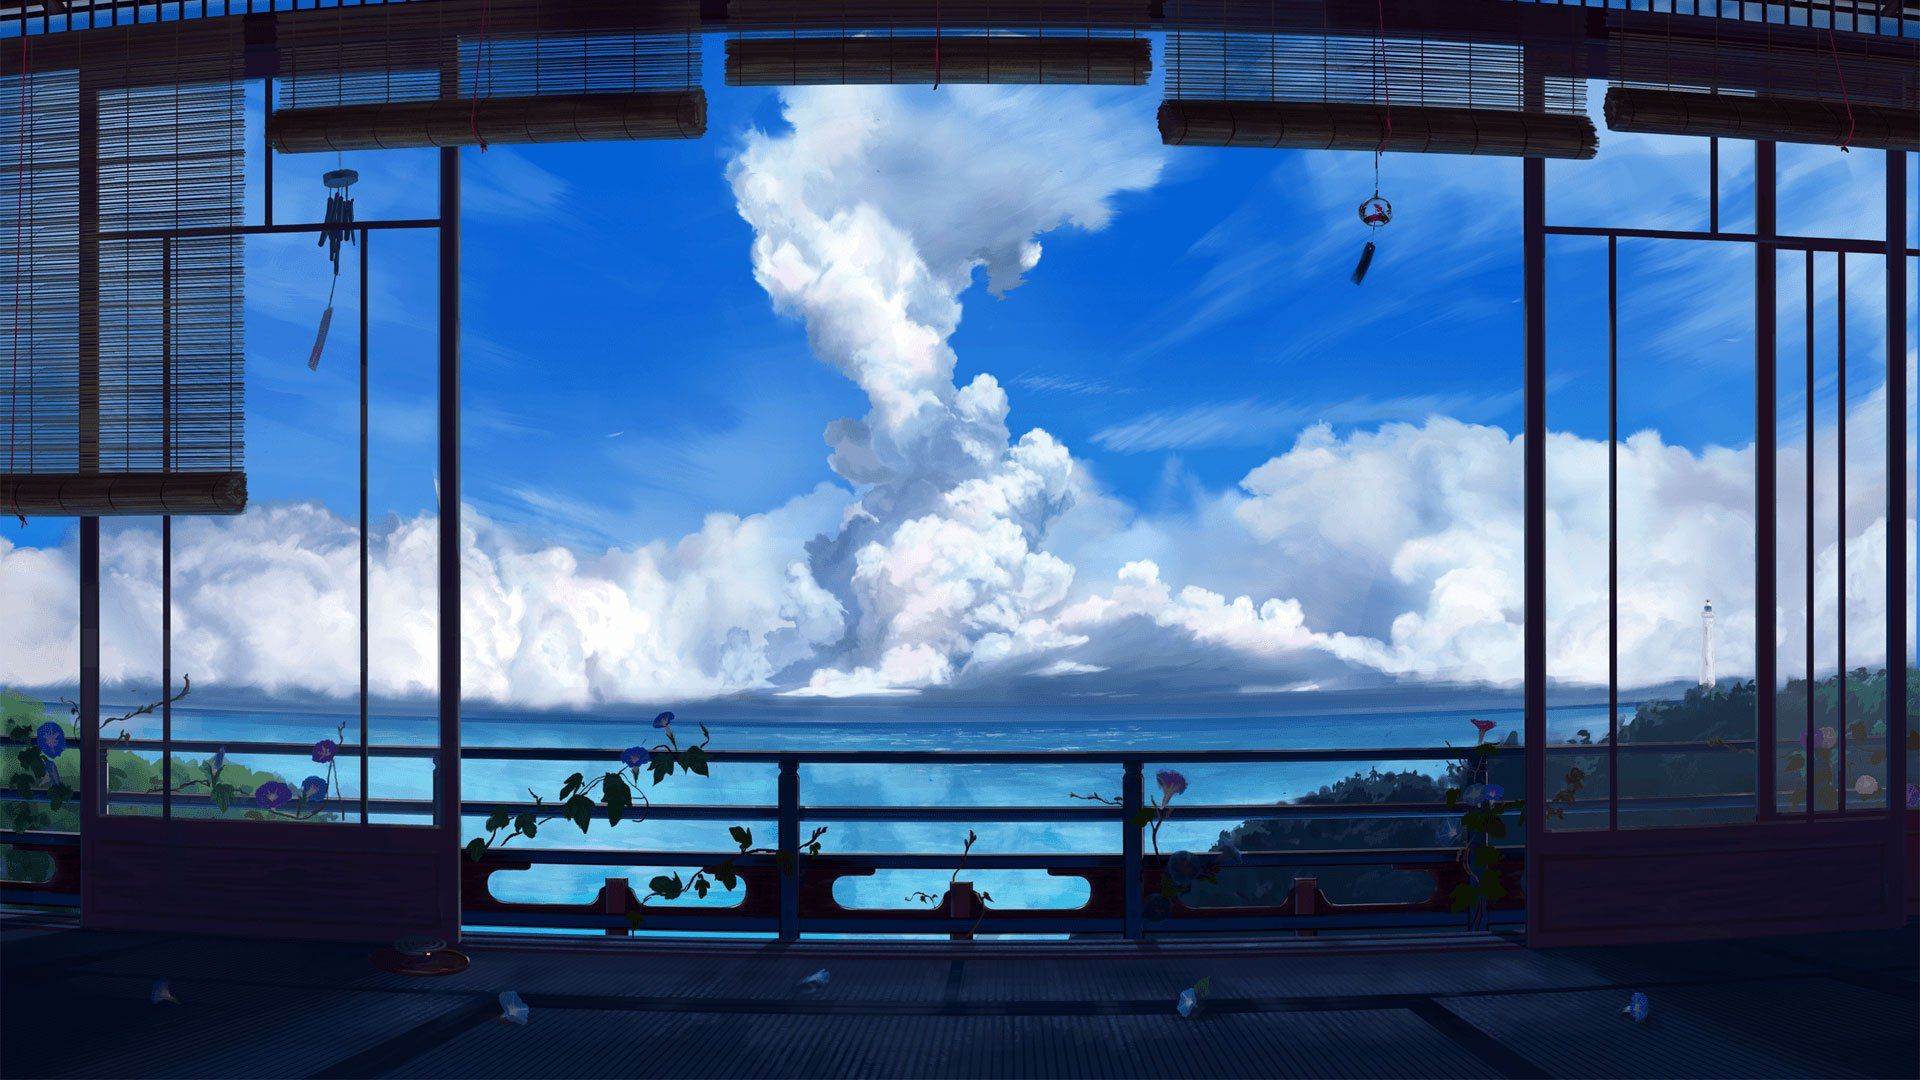 This wallpaper is about Lo fi picture anime, Download HD wallpaper for Desktop, or Mobile in. Anime scenery wallpaper, Clouds wallpaper iphone, Scenery wallpaper